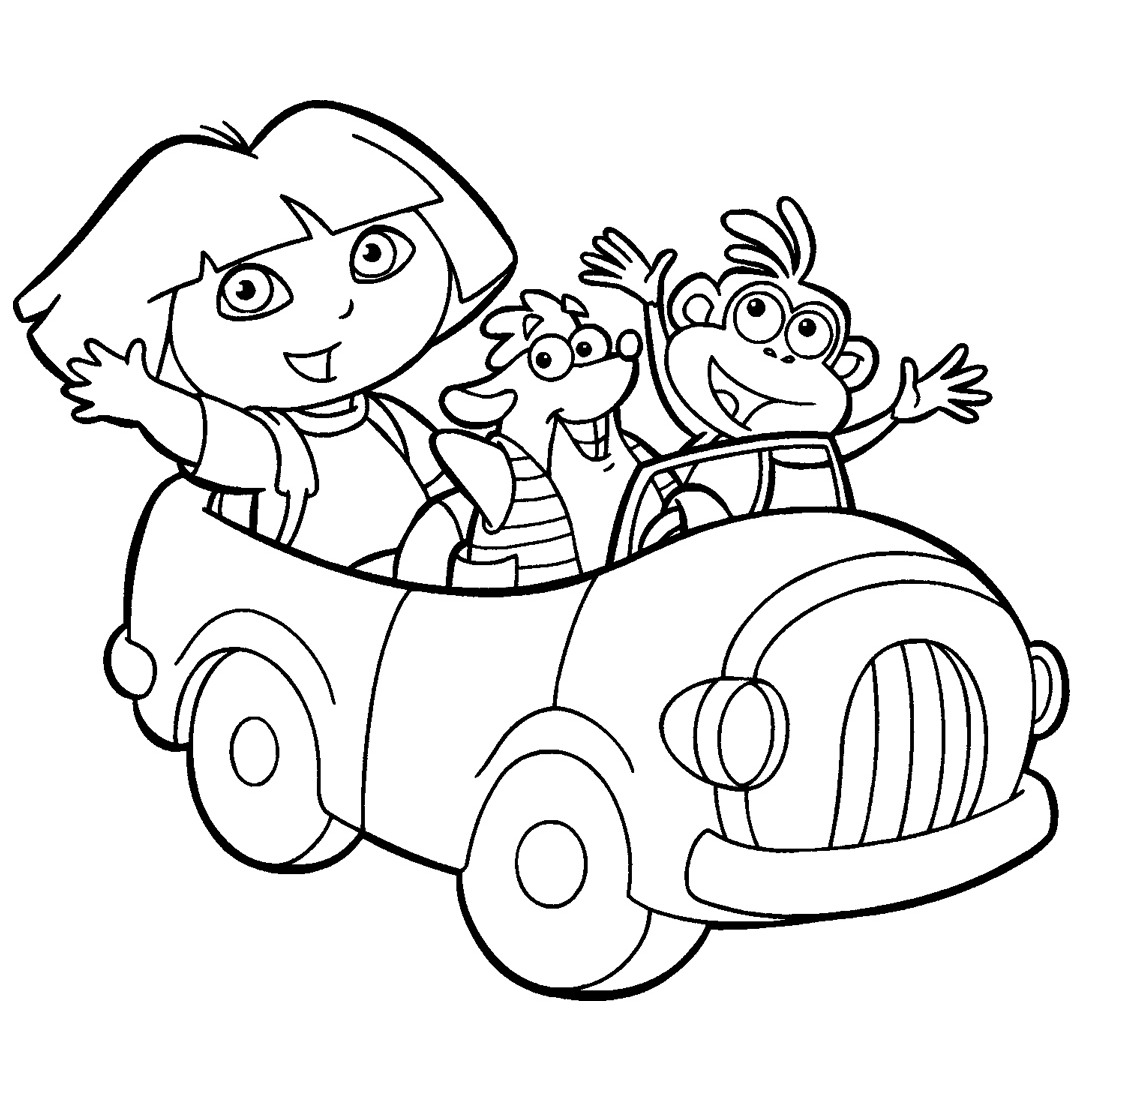 printable dora the explorer coloring pages 10 dora explorer coloring pages free printable coloring pages the explorer coloring dora printable 